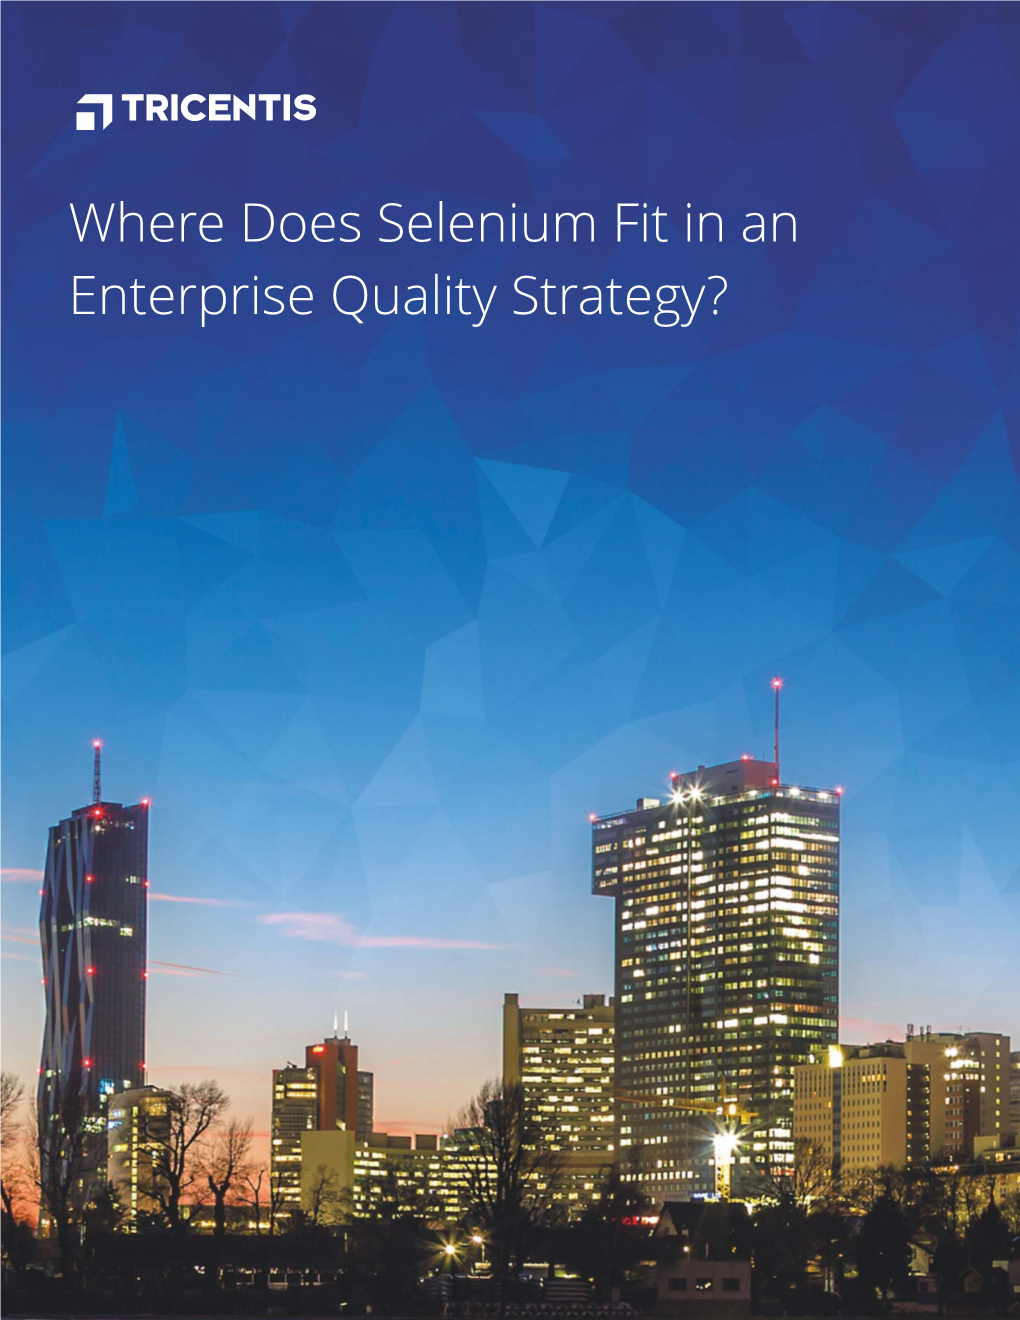 Where Does Selenium Fit in an Enterprise Quality Strategy?